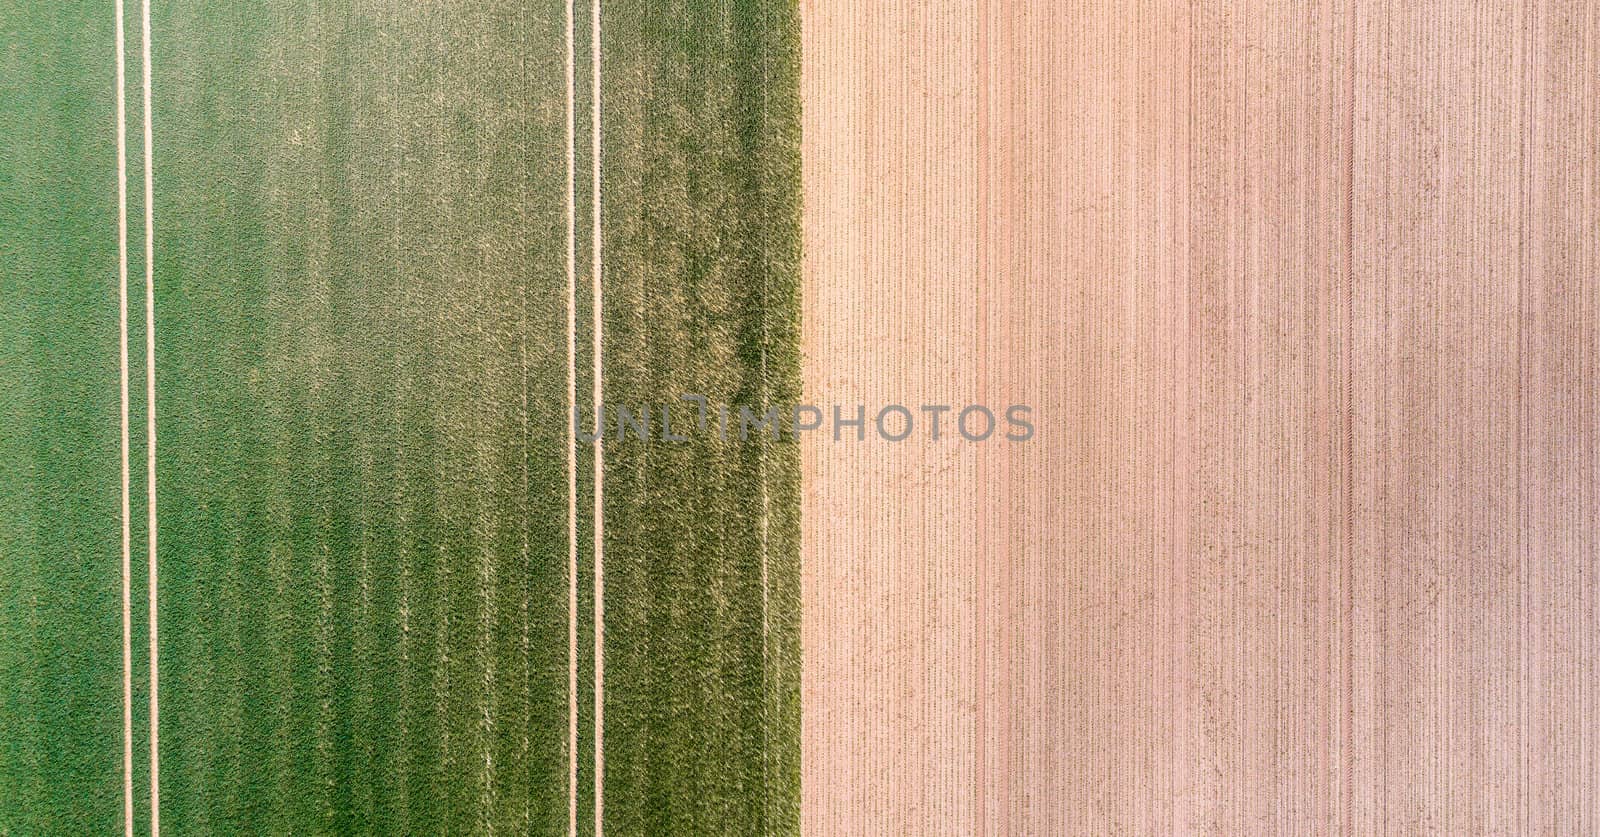 Vertical aerial view of a field with green sprouting young vegetation and a yellow ungreen field surface, abstract impression, texture and background